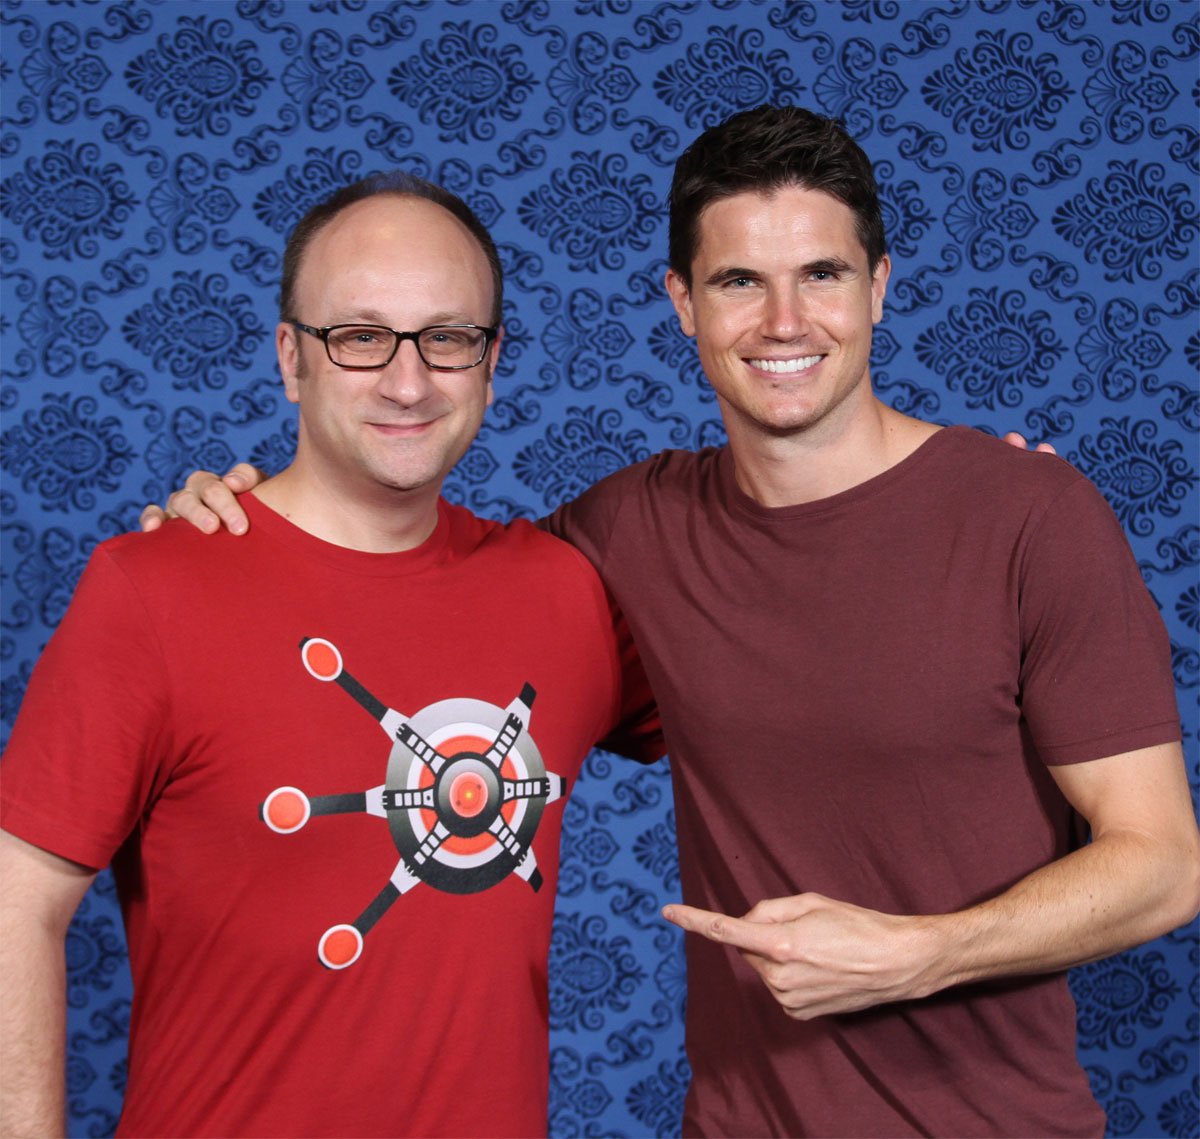 Robbie Amell - Firestorm - Ronnie Raymond from The Flash - and Firestorm Fan at Dragon Con 2015